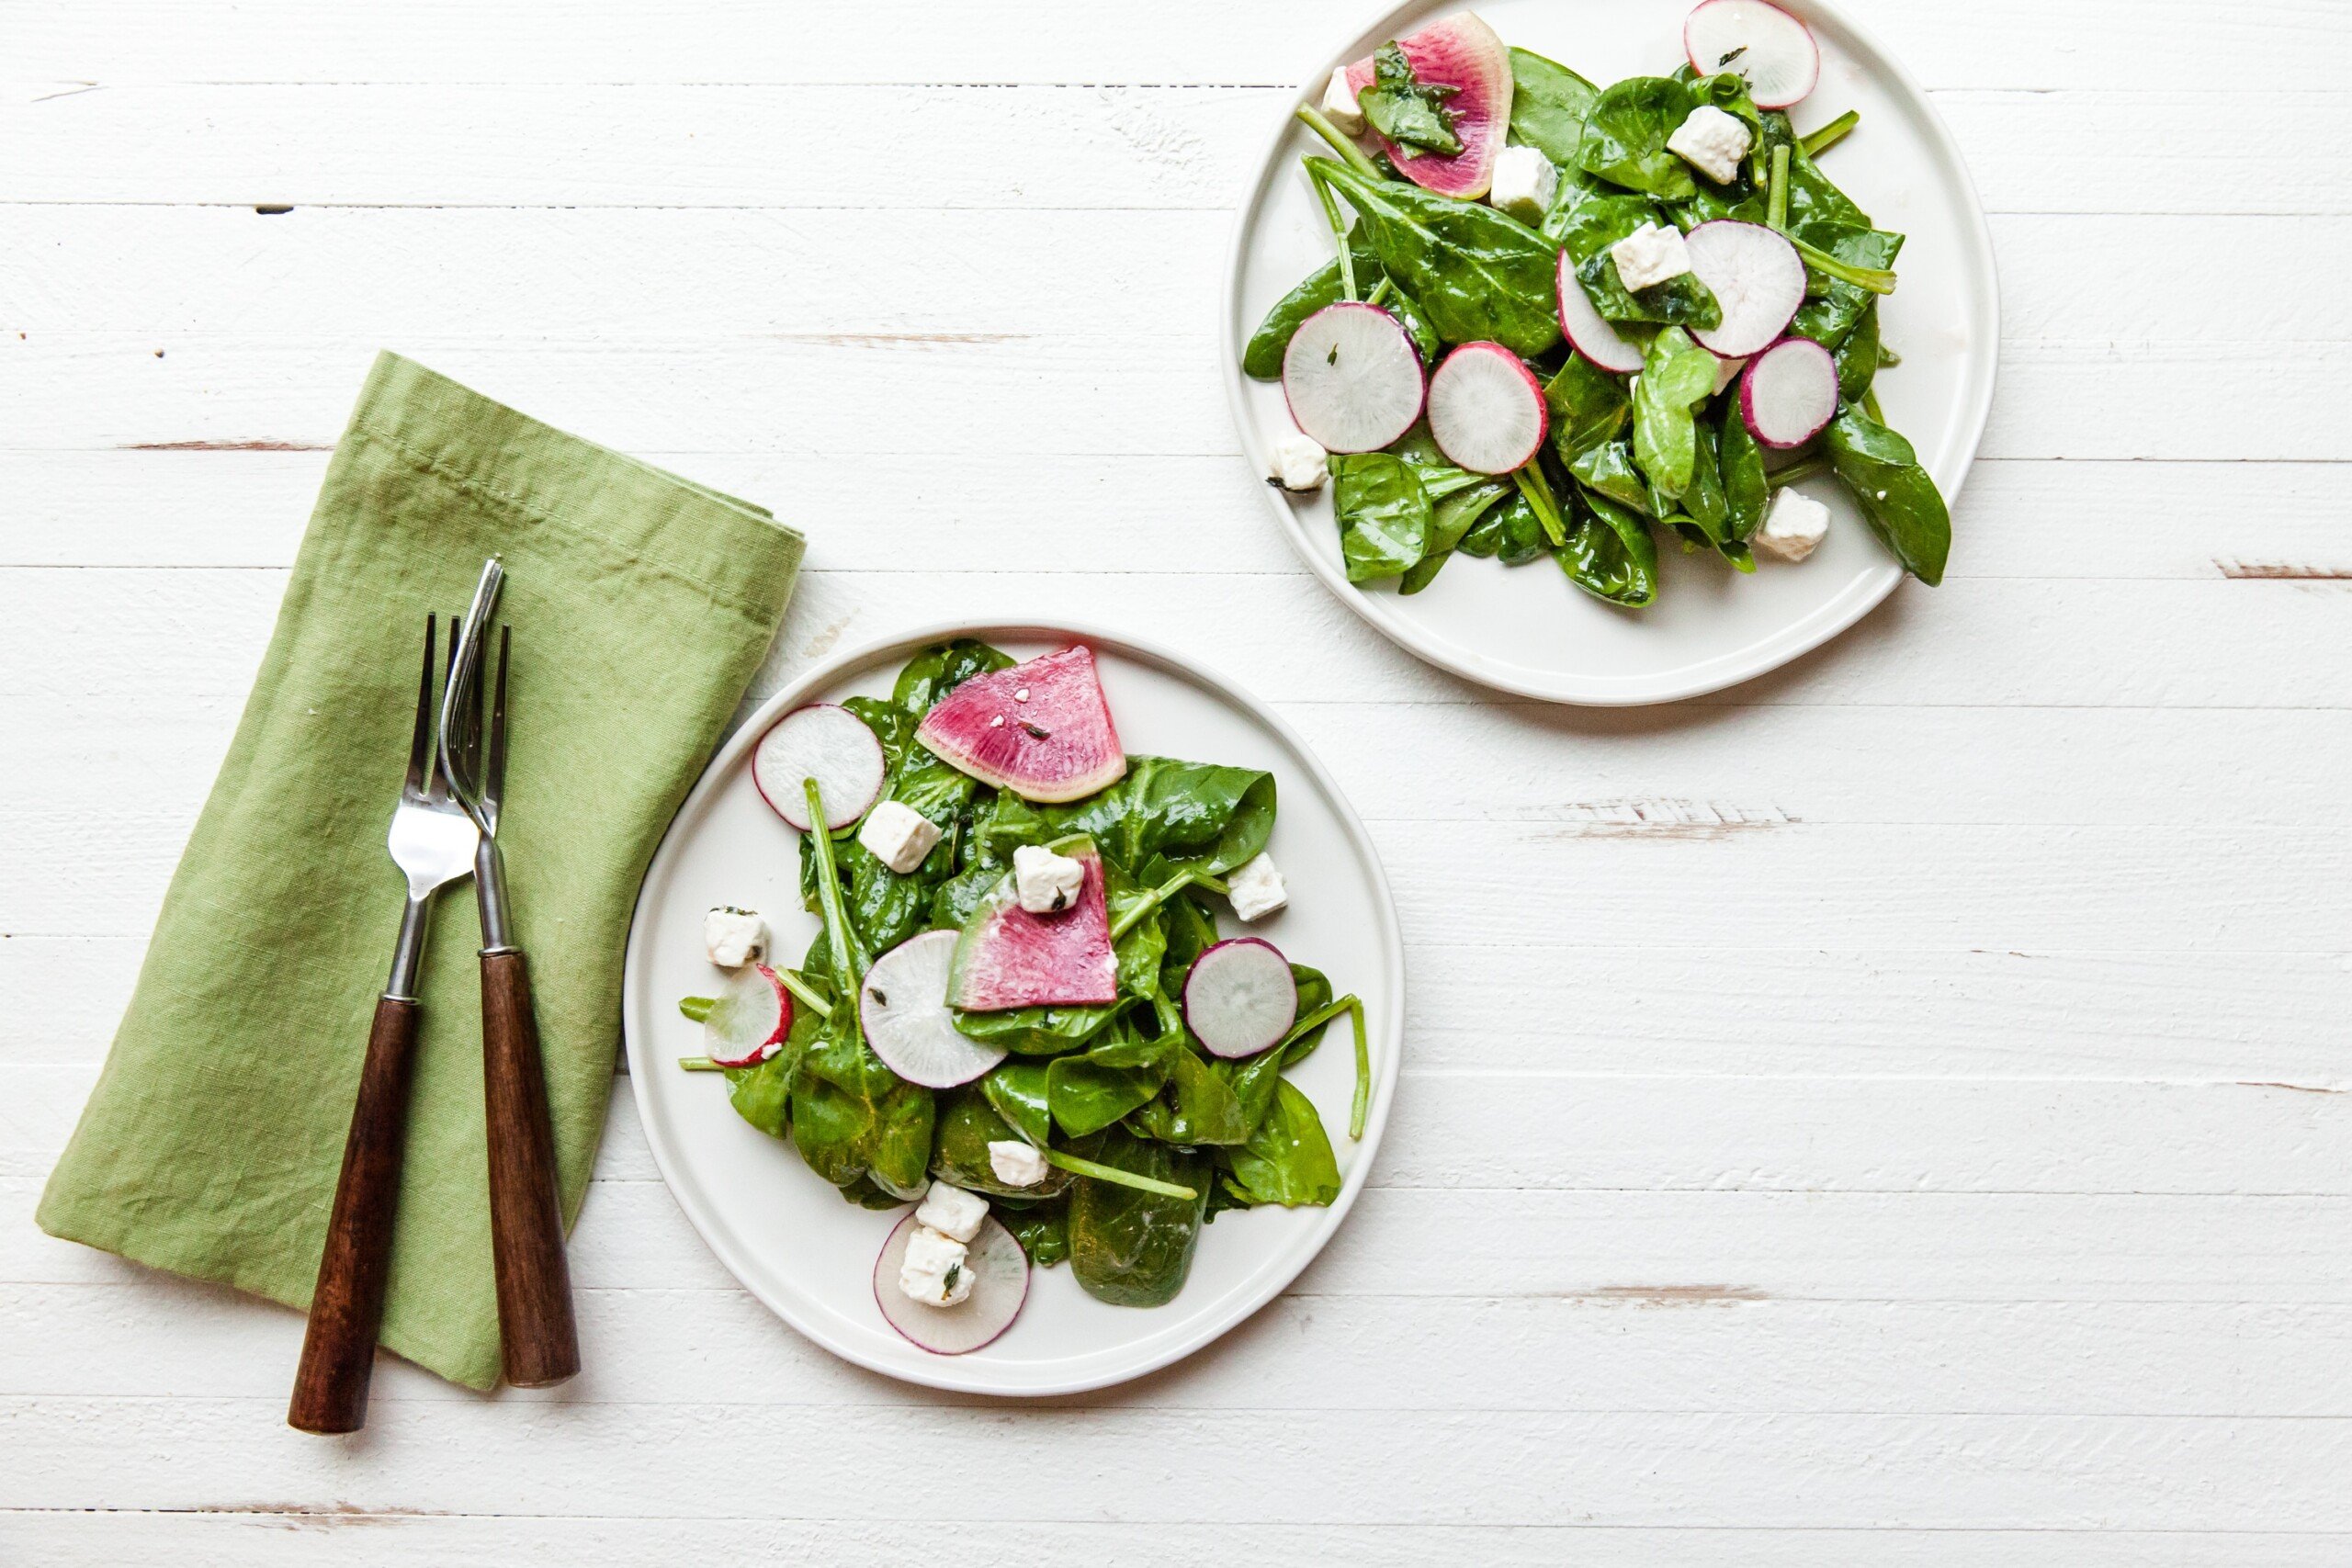 Spinach and Radish Salad with Feta on white plates.